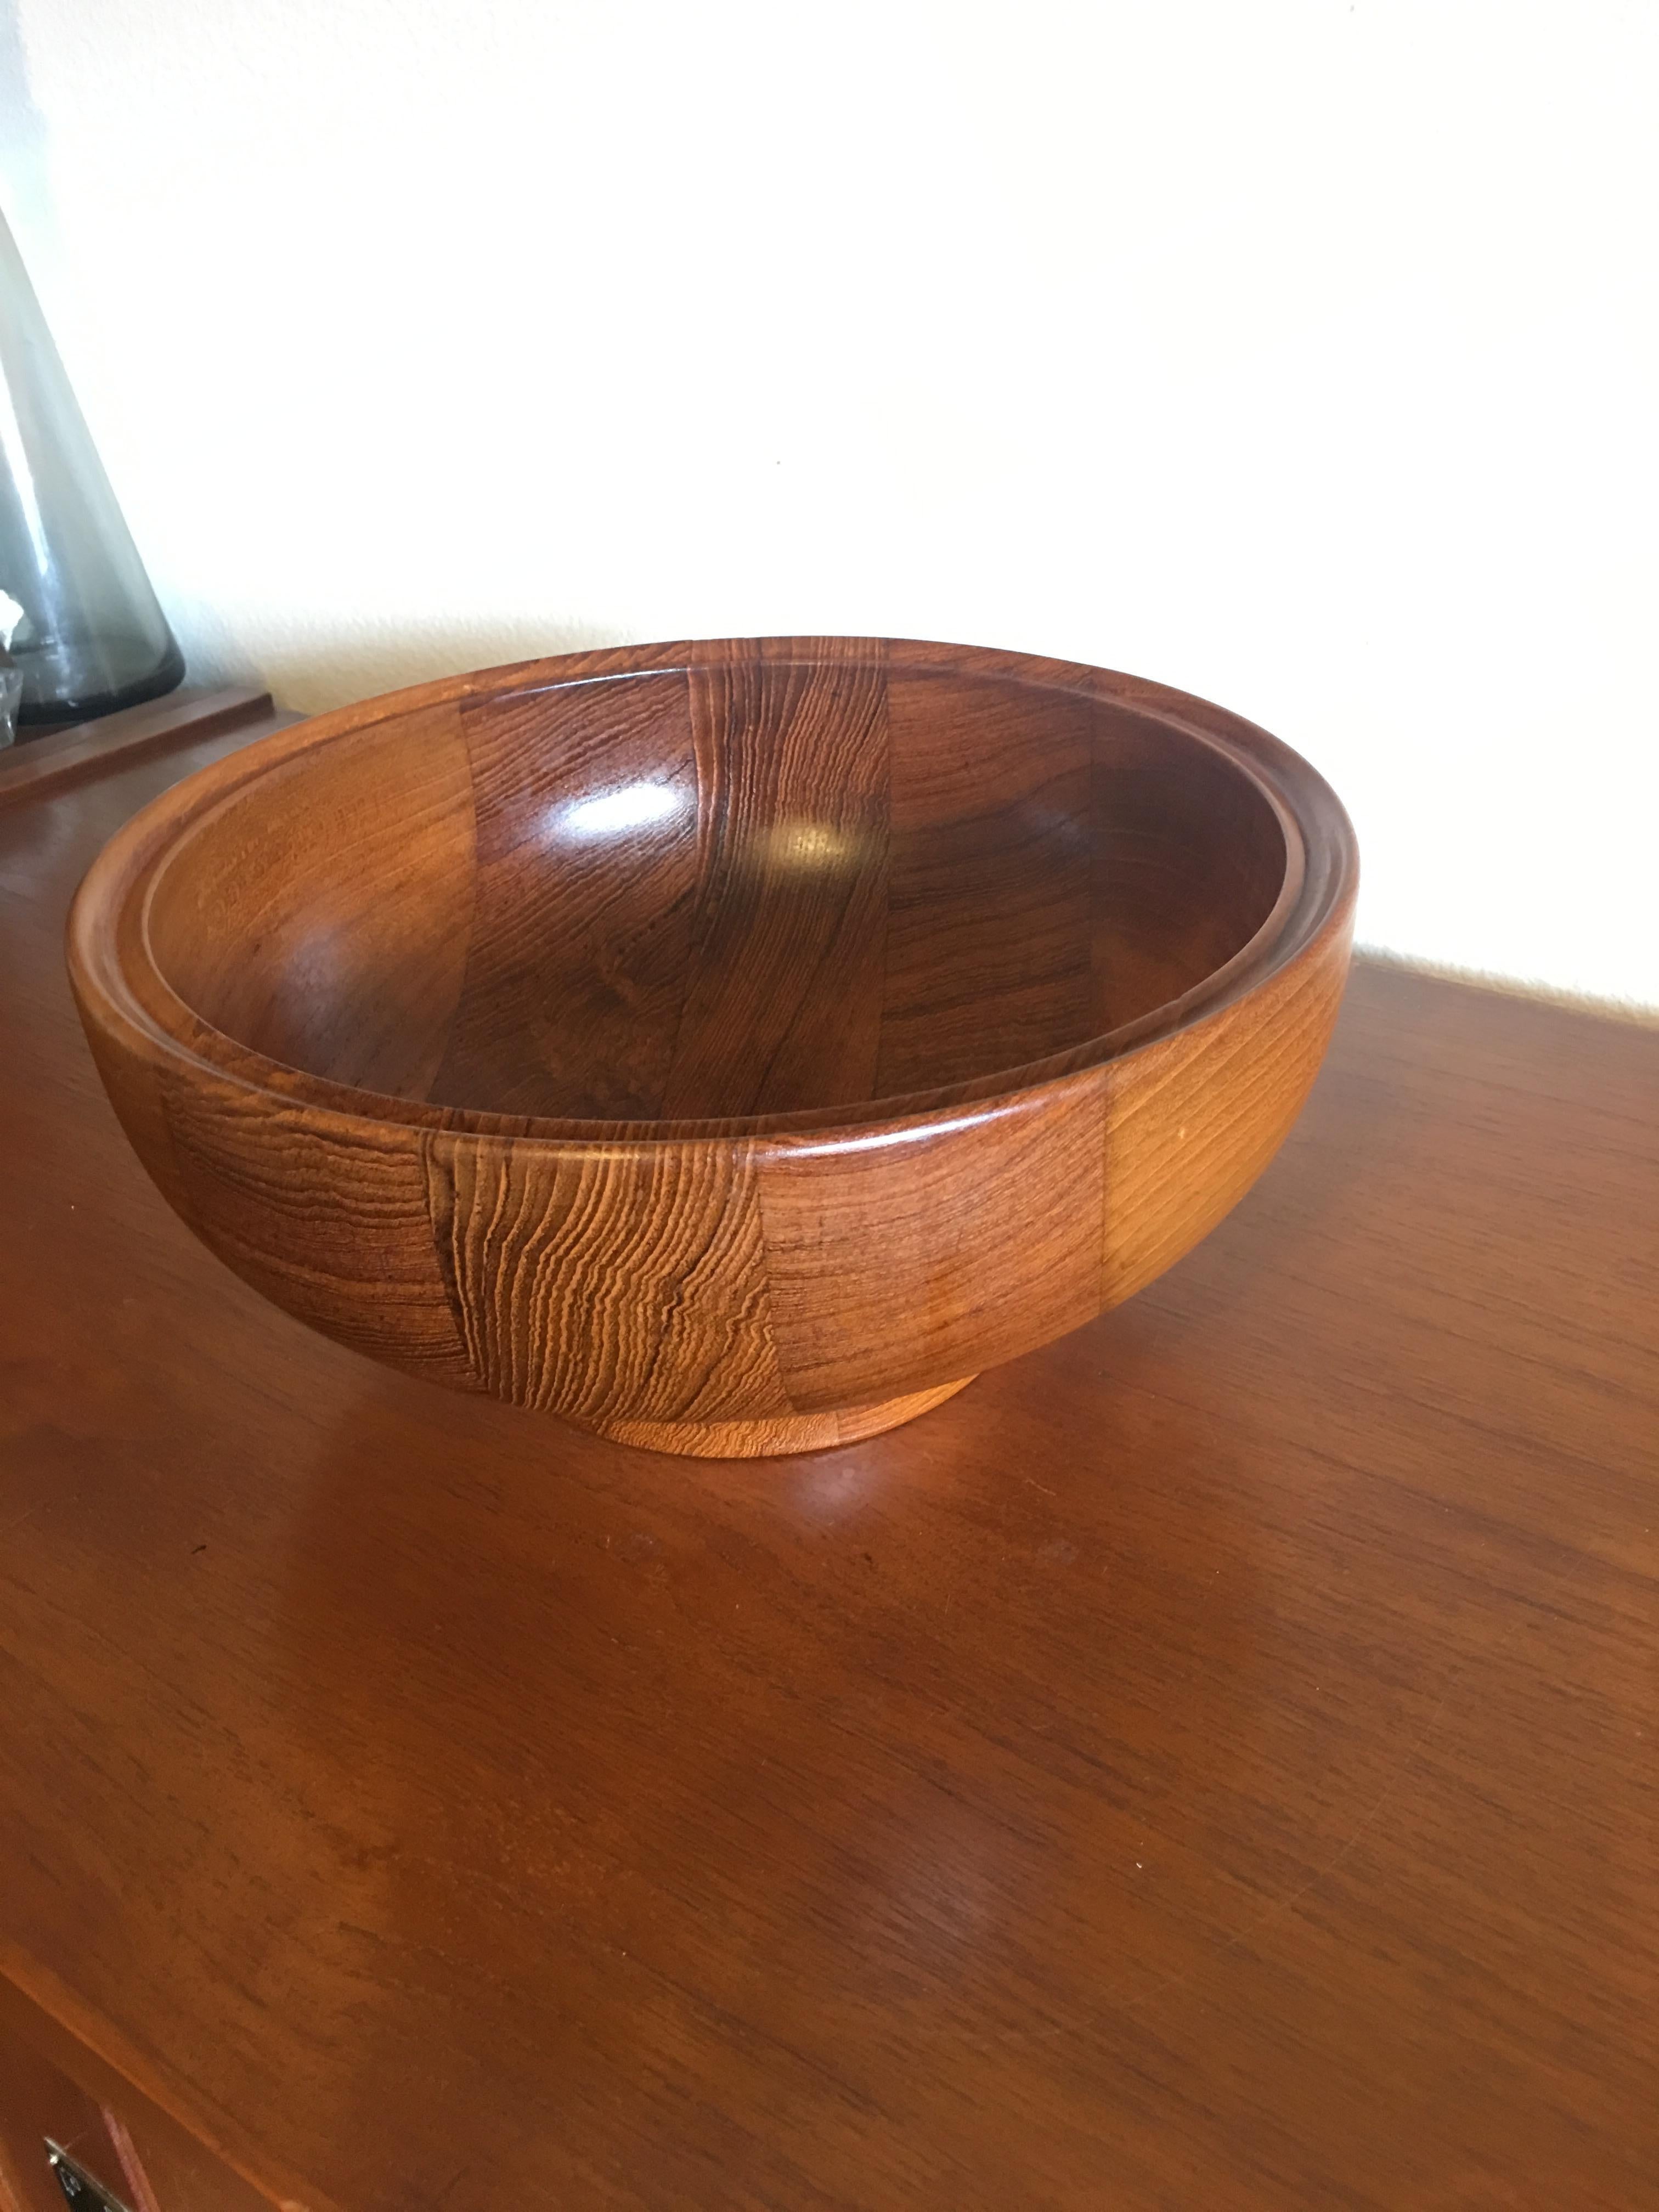 This teak bowl designed by Henning Koppel for Georg Jensen is a beautiful and functional piece that will add a touch of elegance to your home decor. Made from high-quality teak wood, this bowl has a smooth and polished finish that highlights the